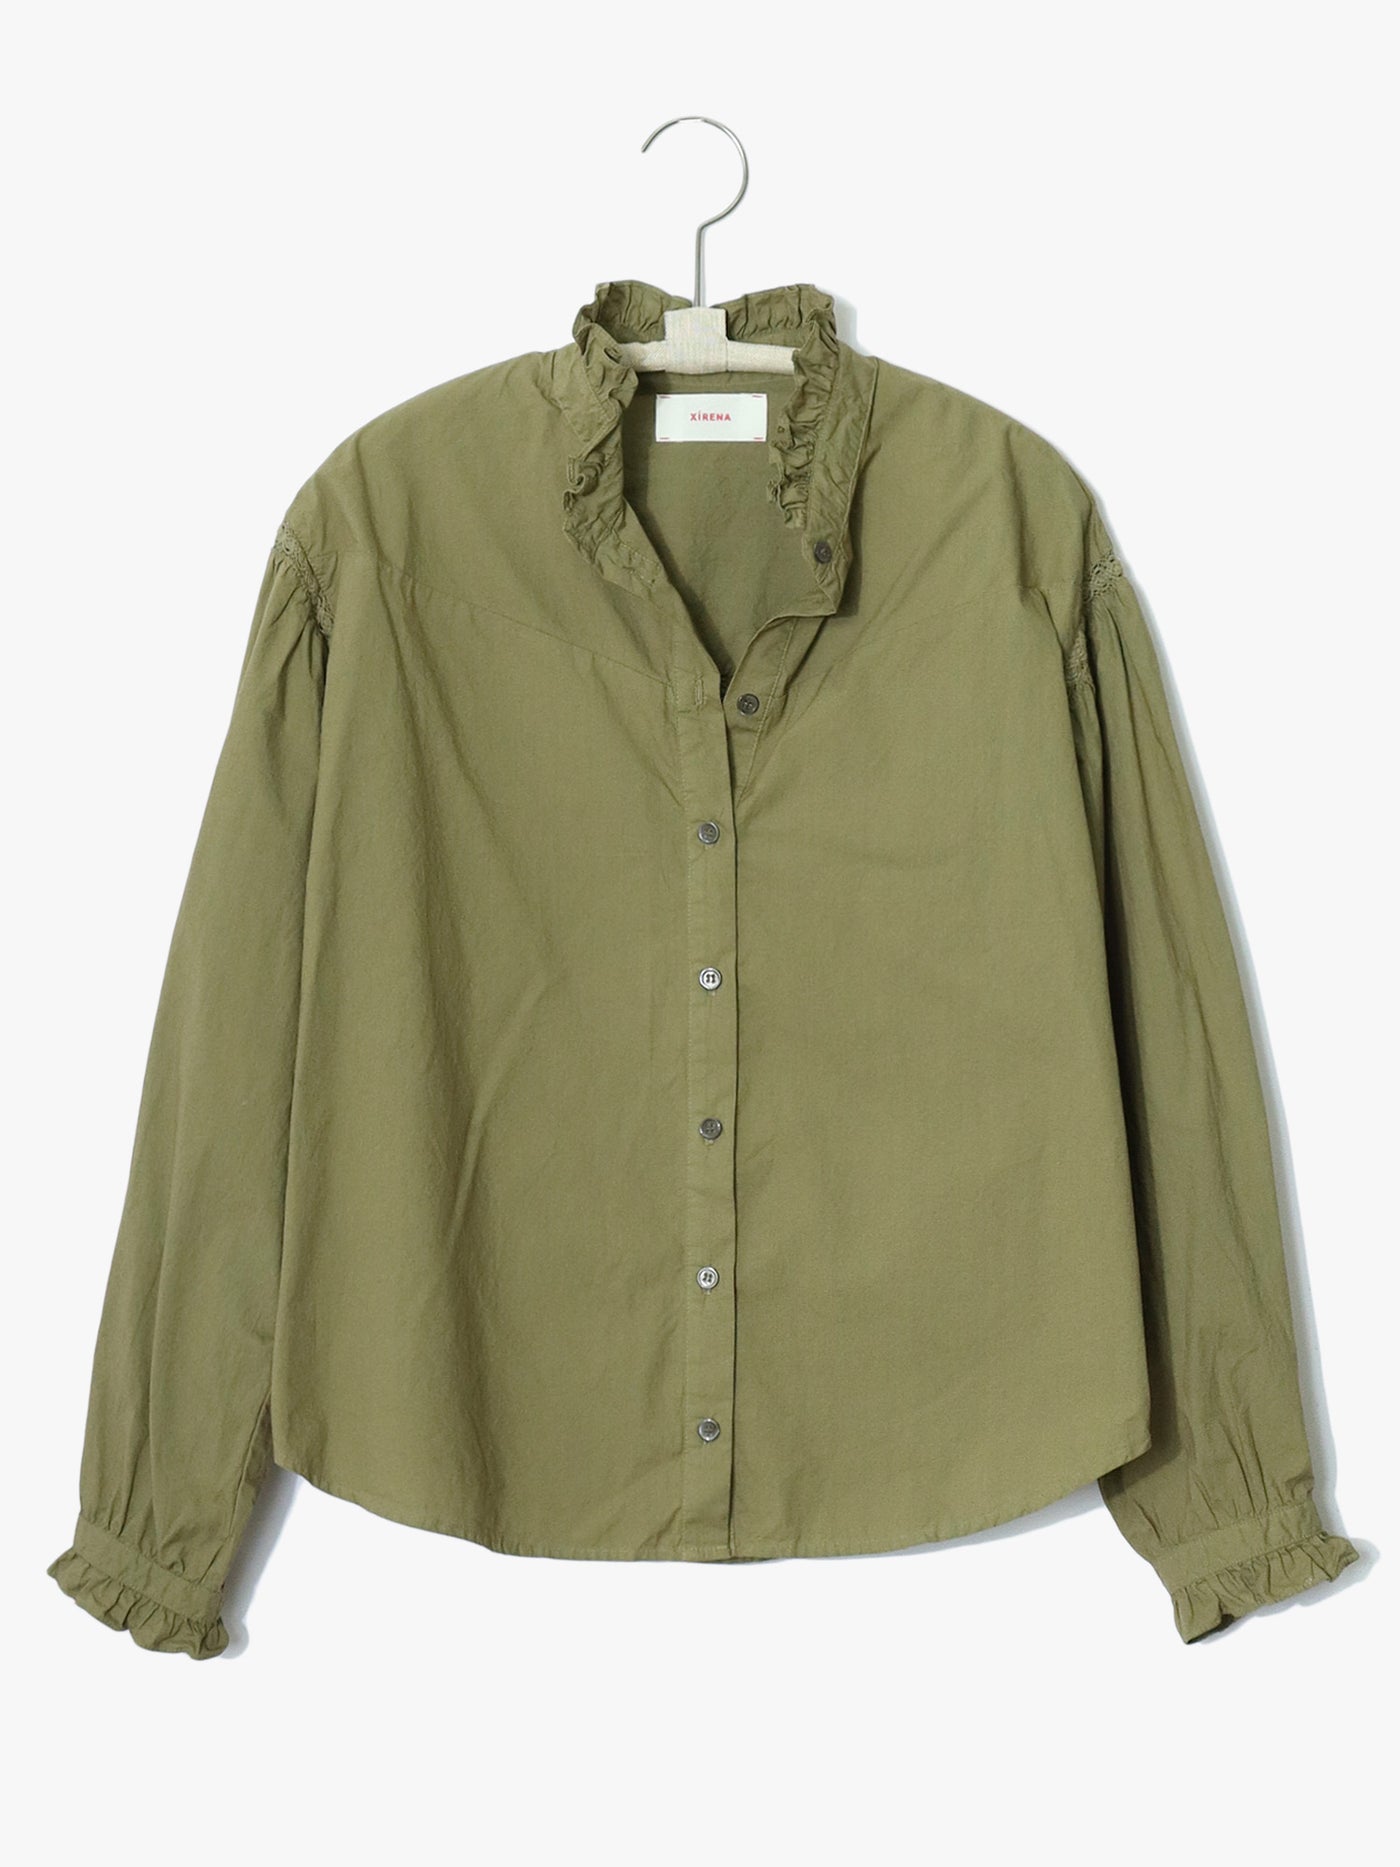 Colette Shirt in Thyme